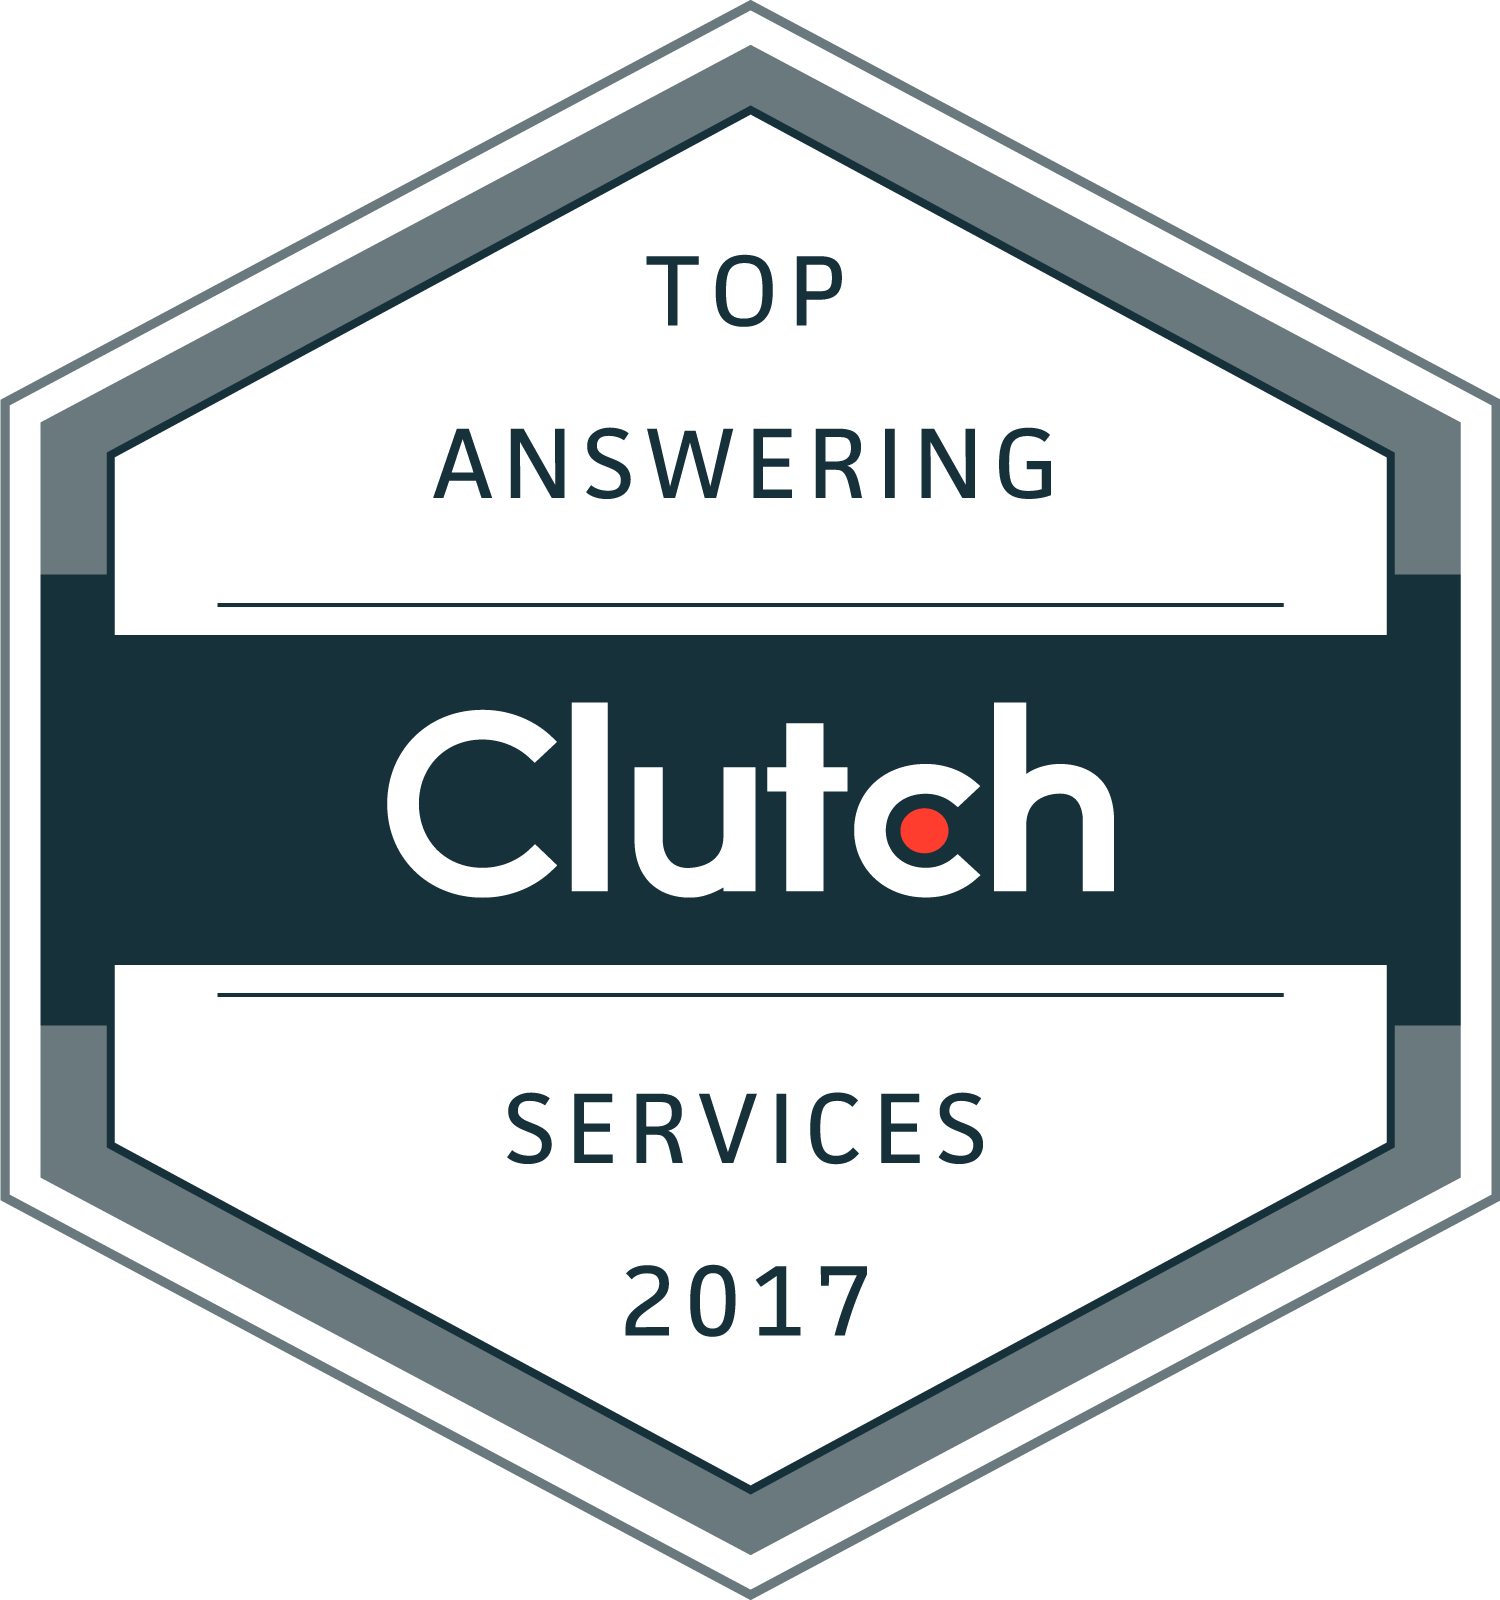 Sound Telecom Recognized as a Top Answering Service Provider